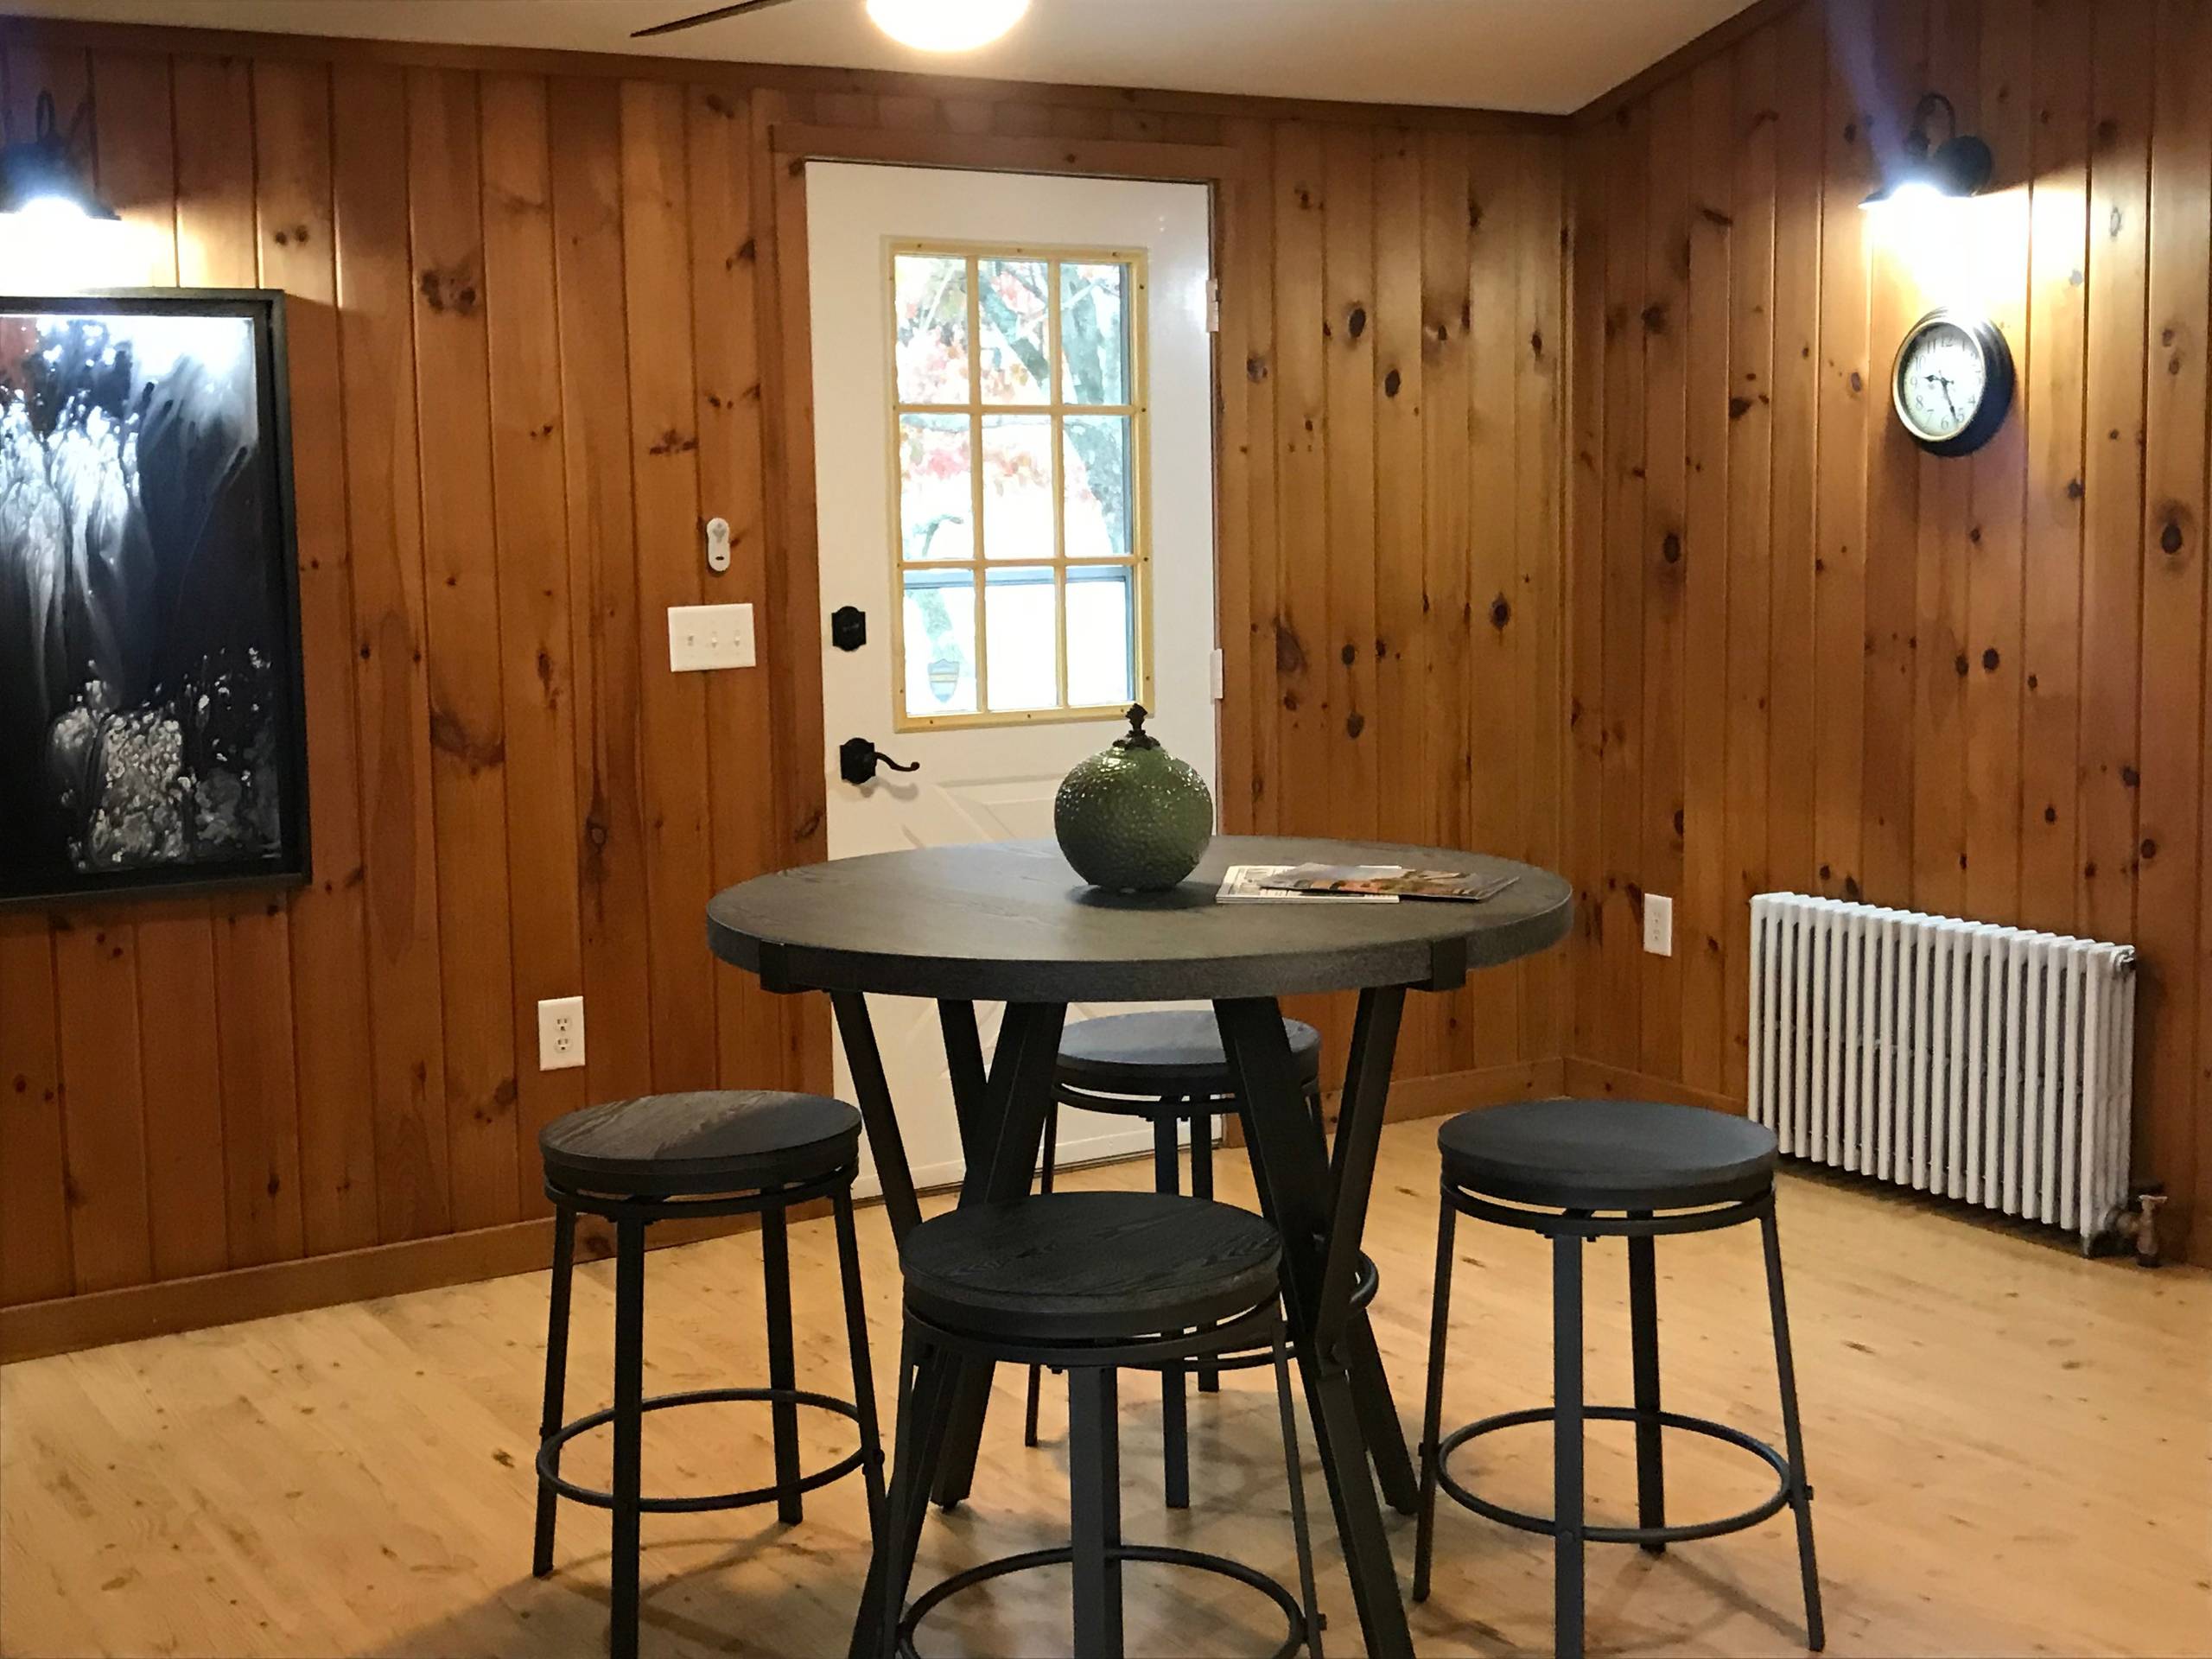 ESOPUS VACANT STAGING